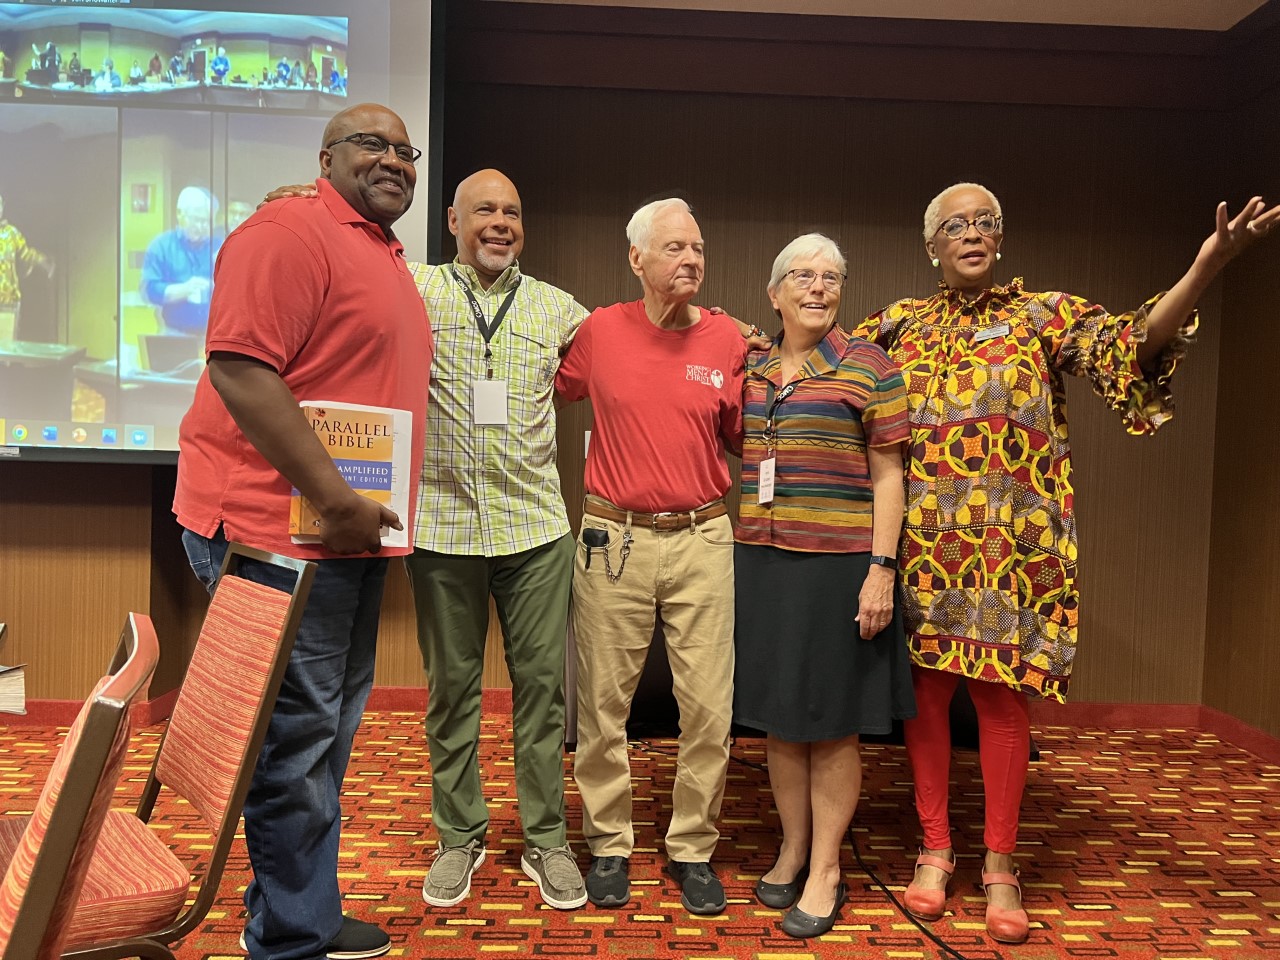 Spencer Lindsay, left, and Jerry Horn (both wearing red shirts) from Working Men of Christ stand with U.S. board member Terry Hunt (green shirt) and MCC U.S. Executive Director Ann Graber Hershberger (black skirt) and MCC U.S. Central States Executive Director Michelle Armster, right, after their presentation at the October 2022 MCC U.S. board meeting.